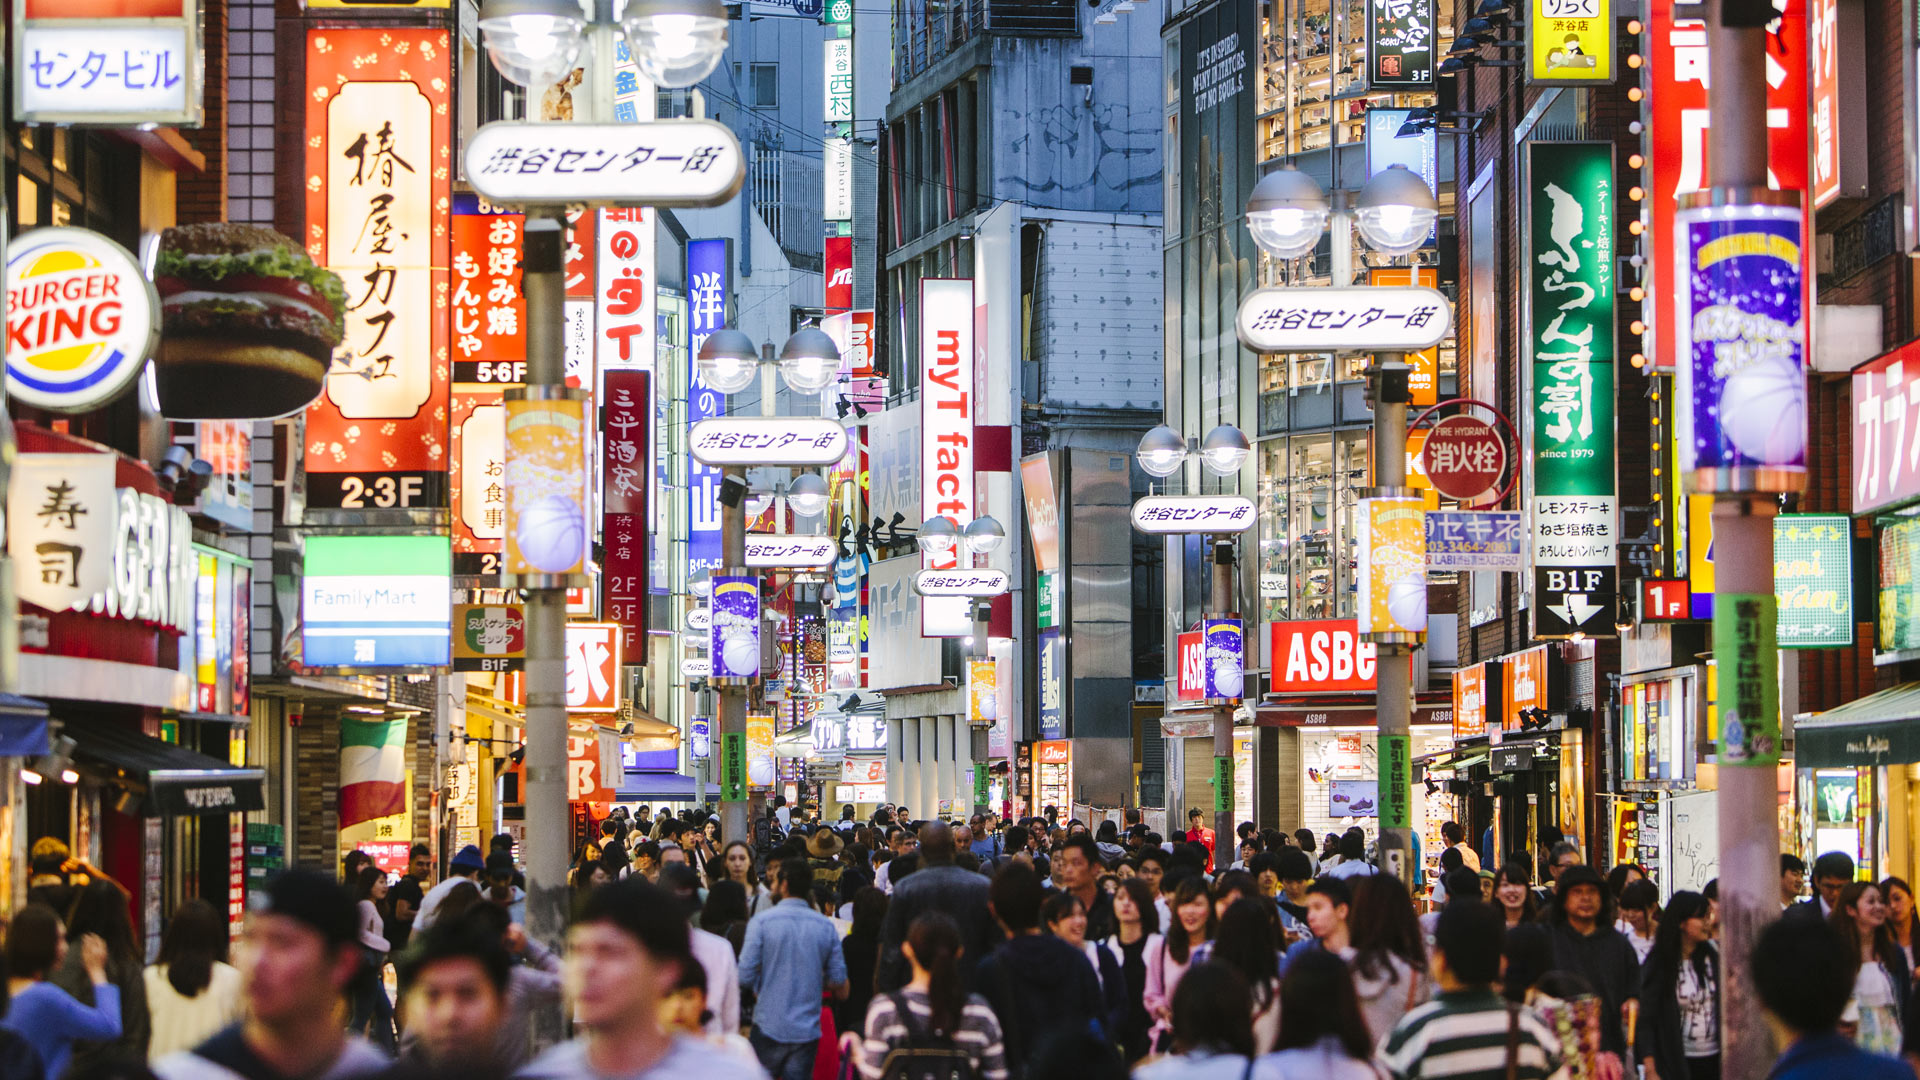 An image of a busy street in Japan